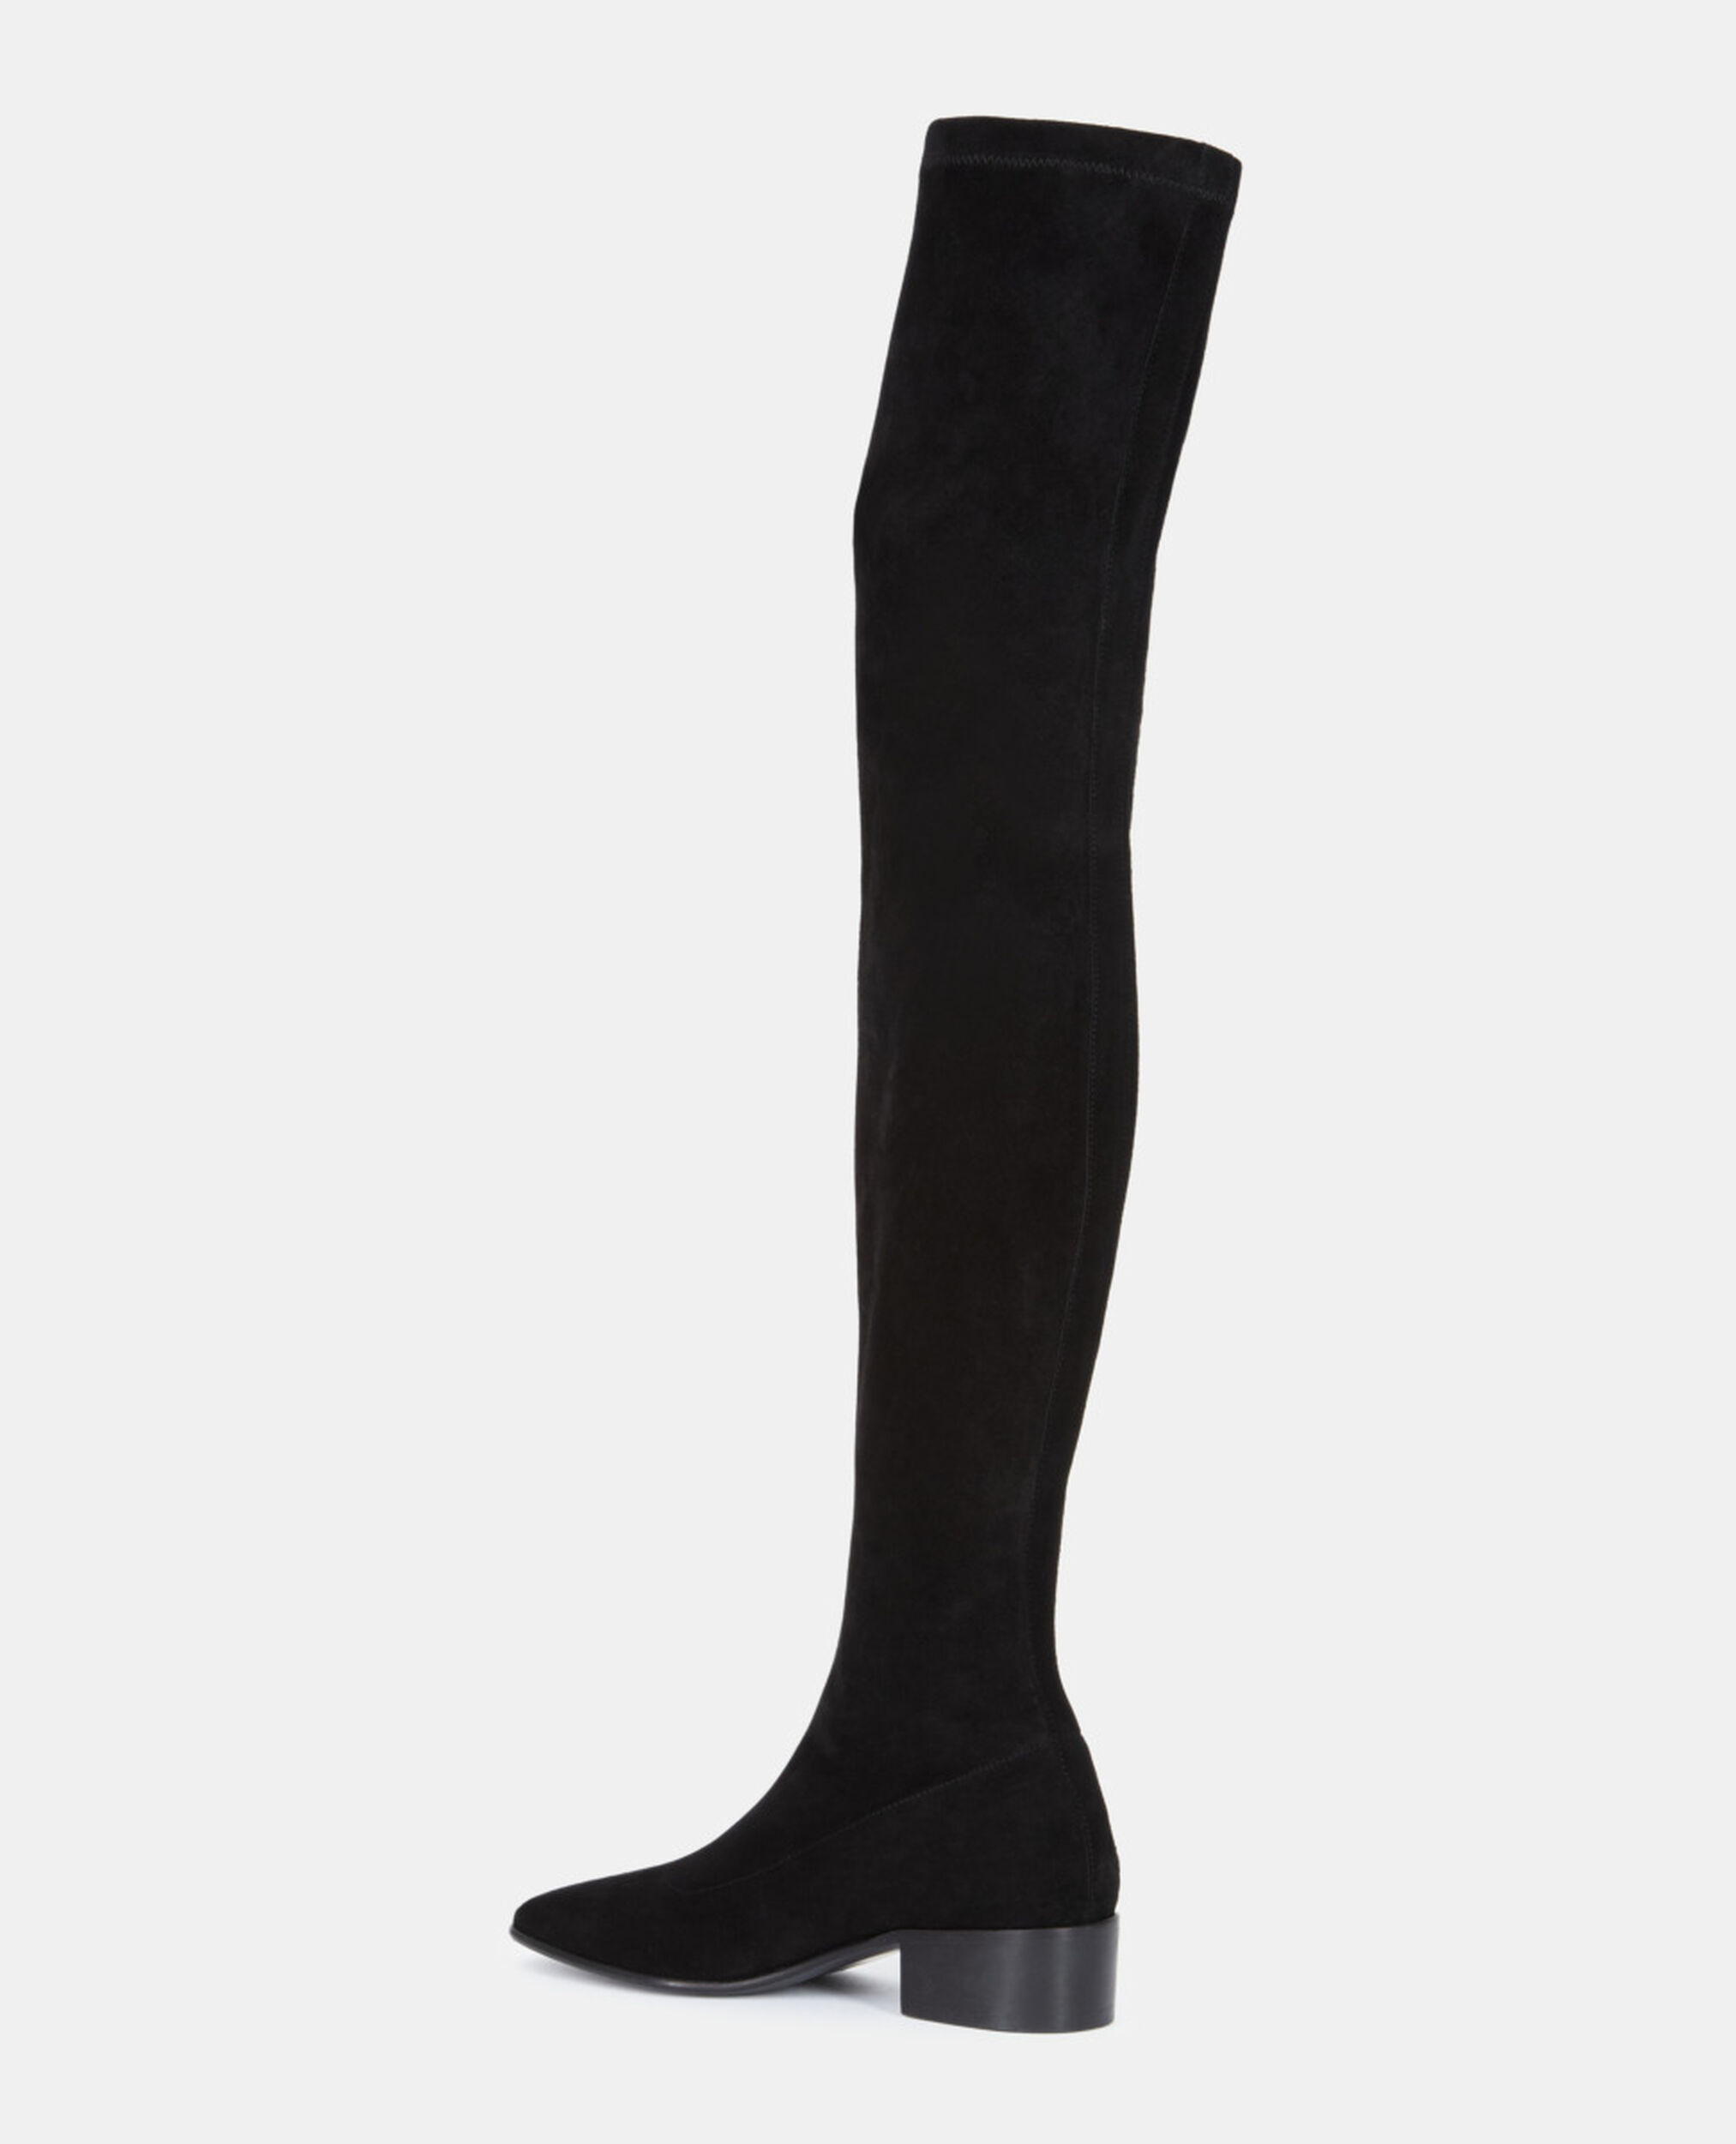 Black leather thigh-high boots, BLACK, hi-res image number null